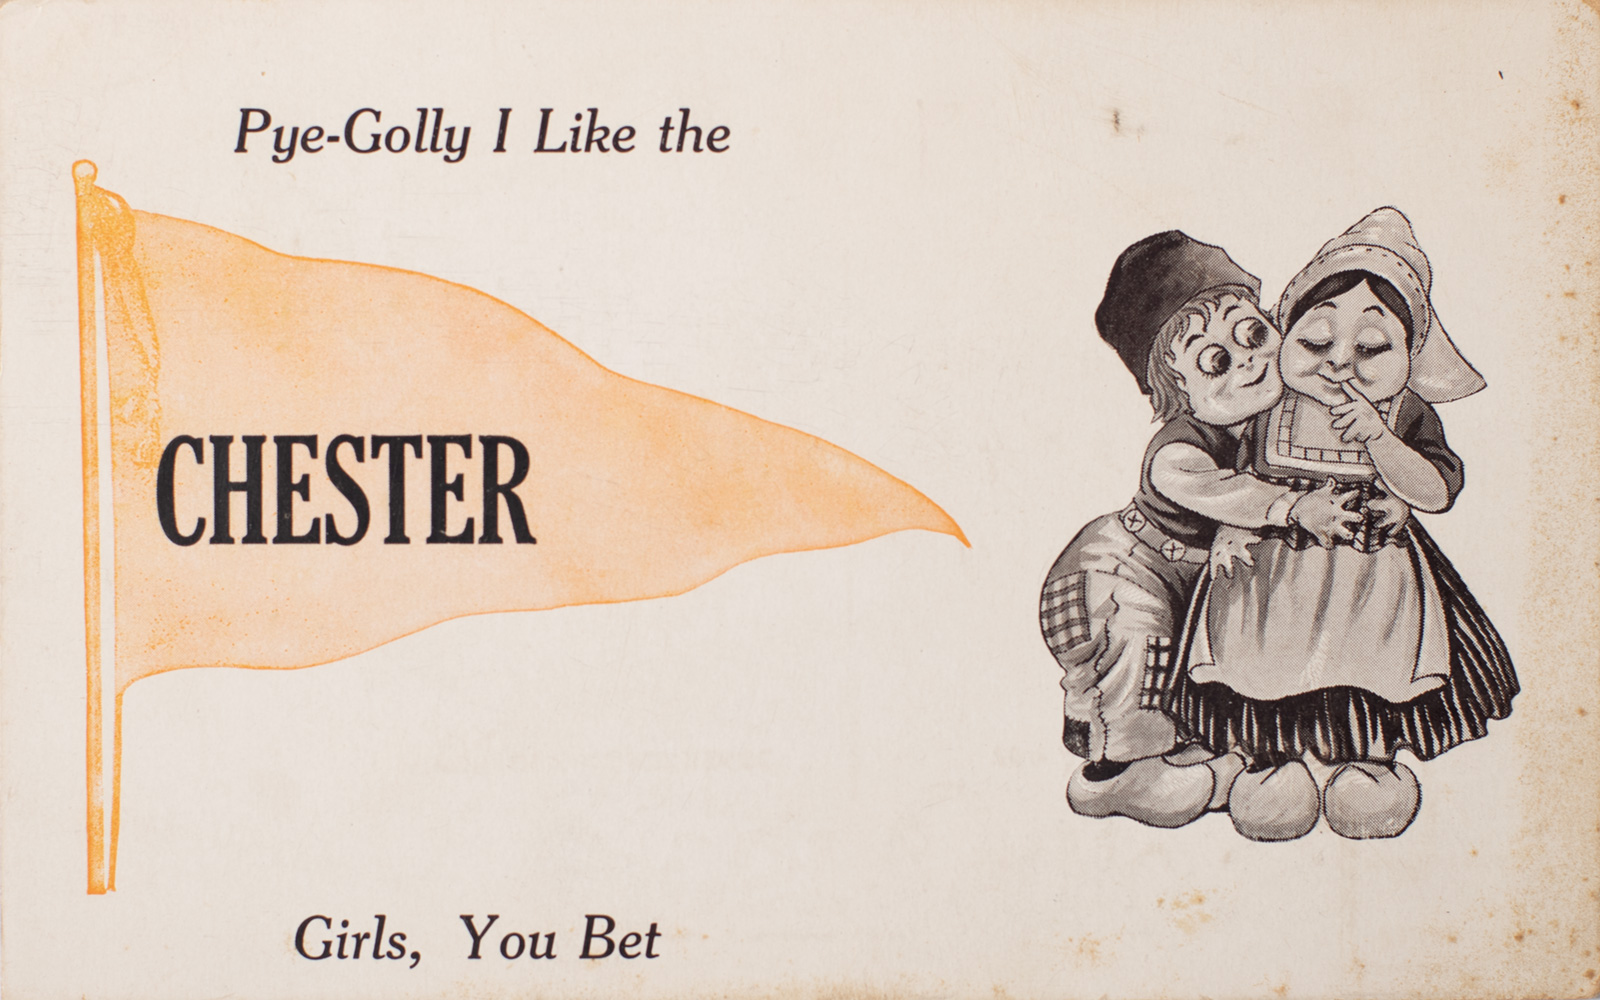 Pye-Golly I Like the Chester Girls, You Bet - 1913 Postcard-image